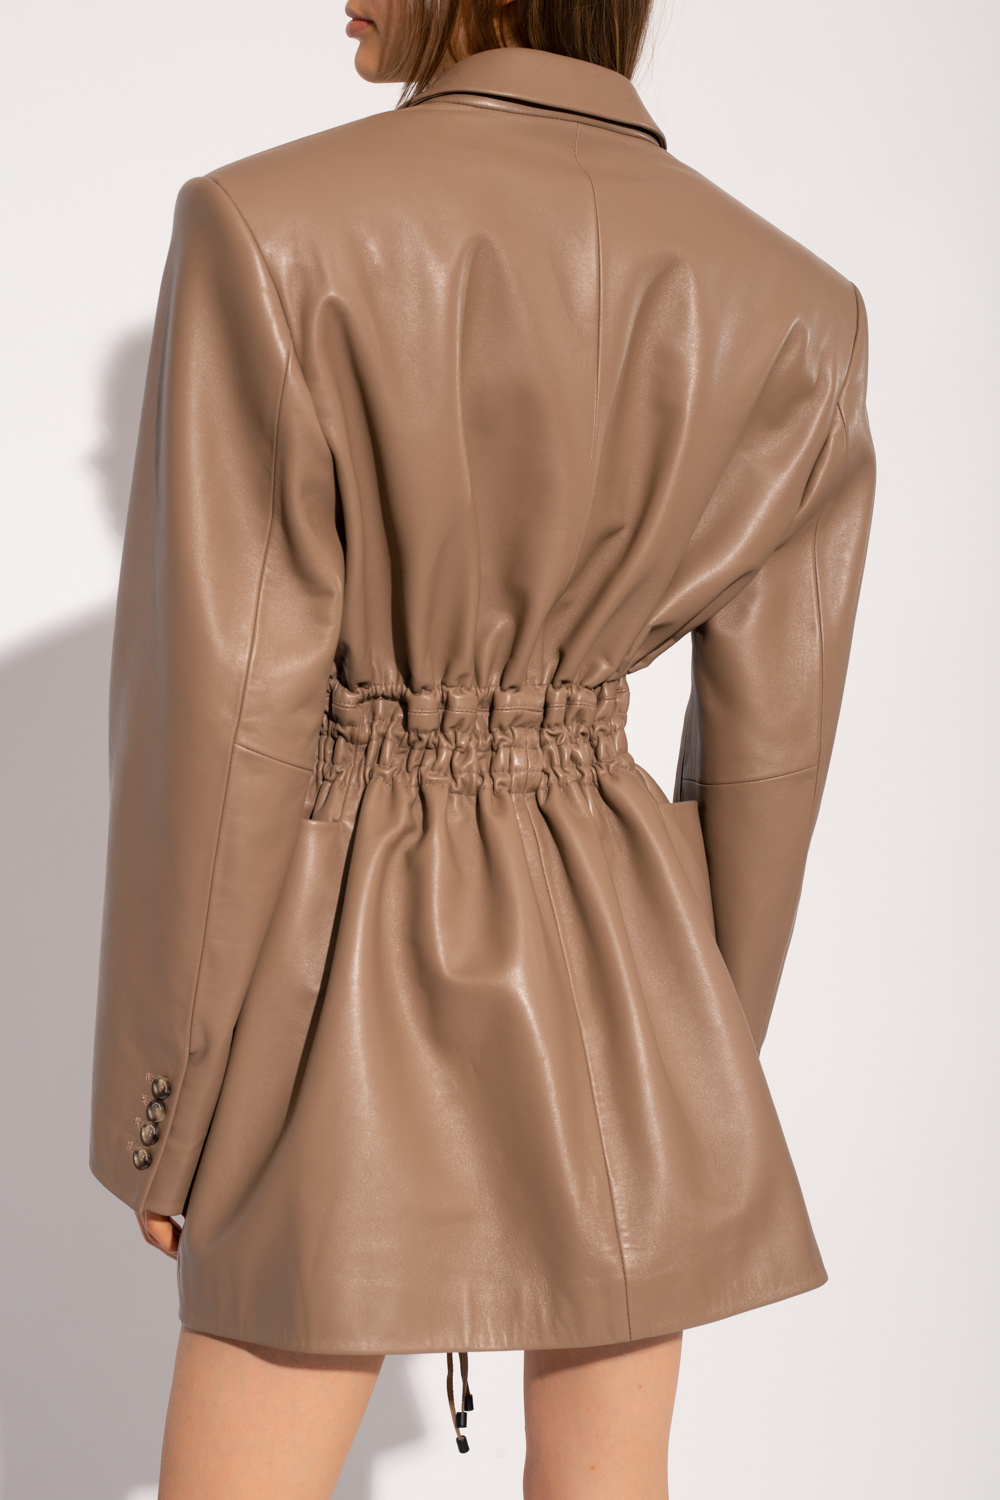 The Mannei ‘Irbid’ leather With dress